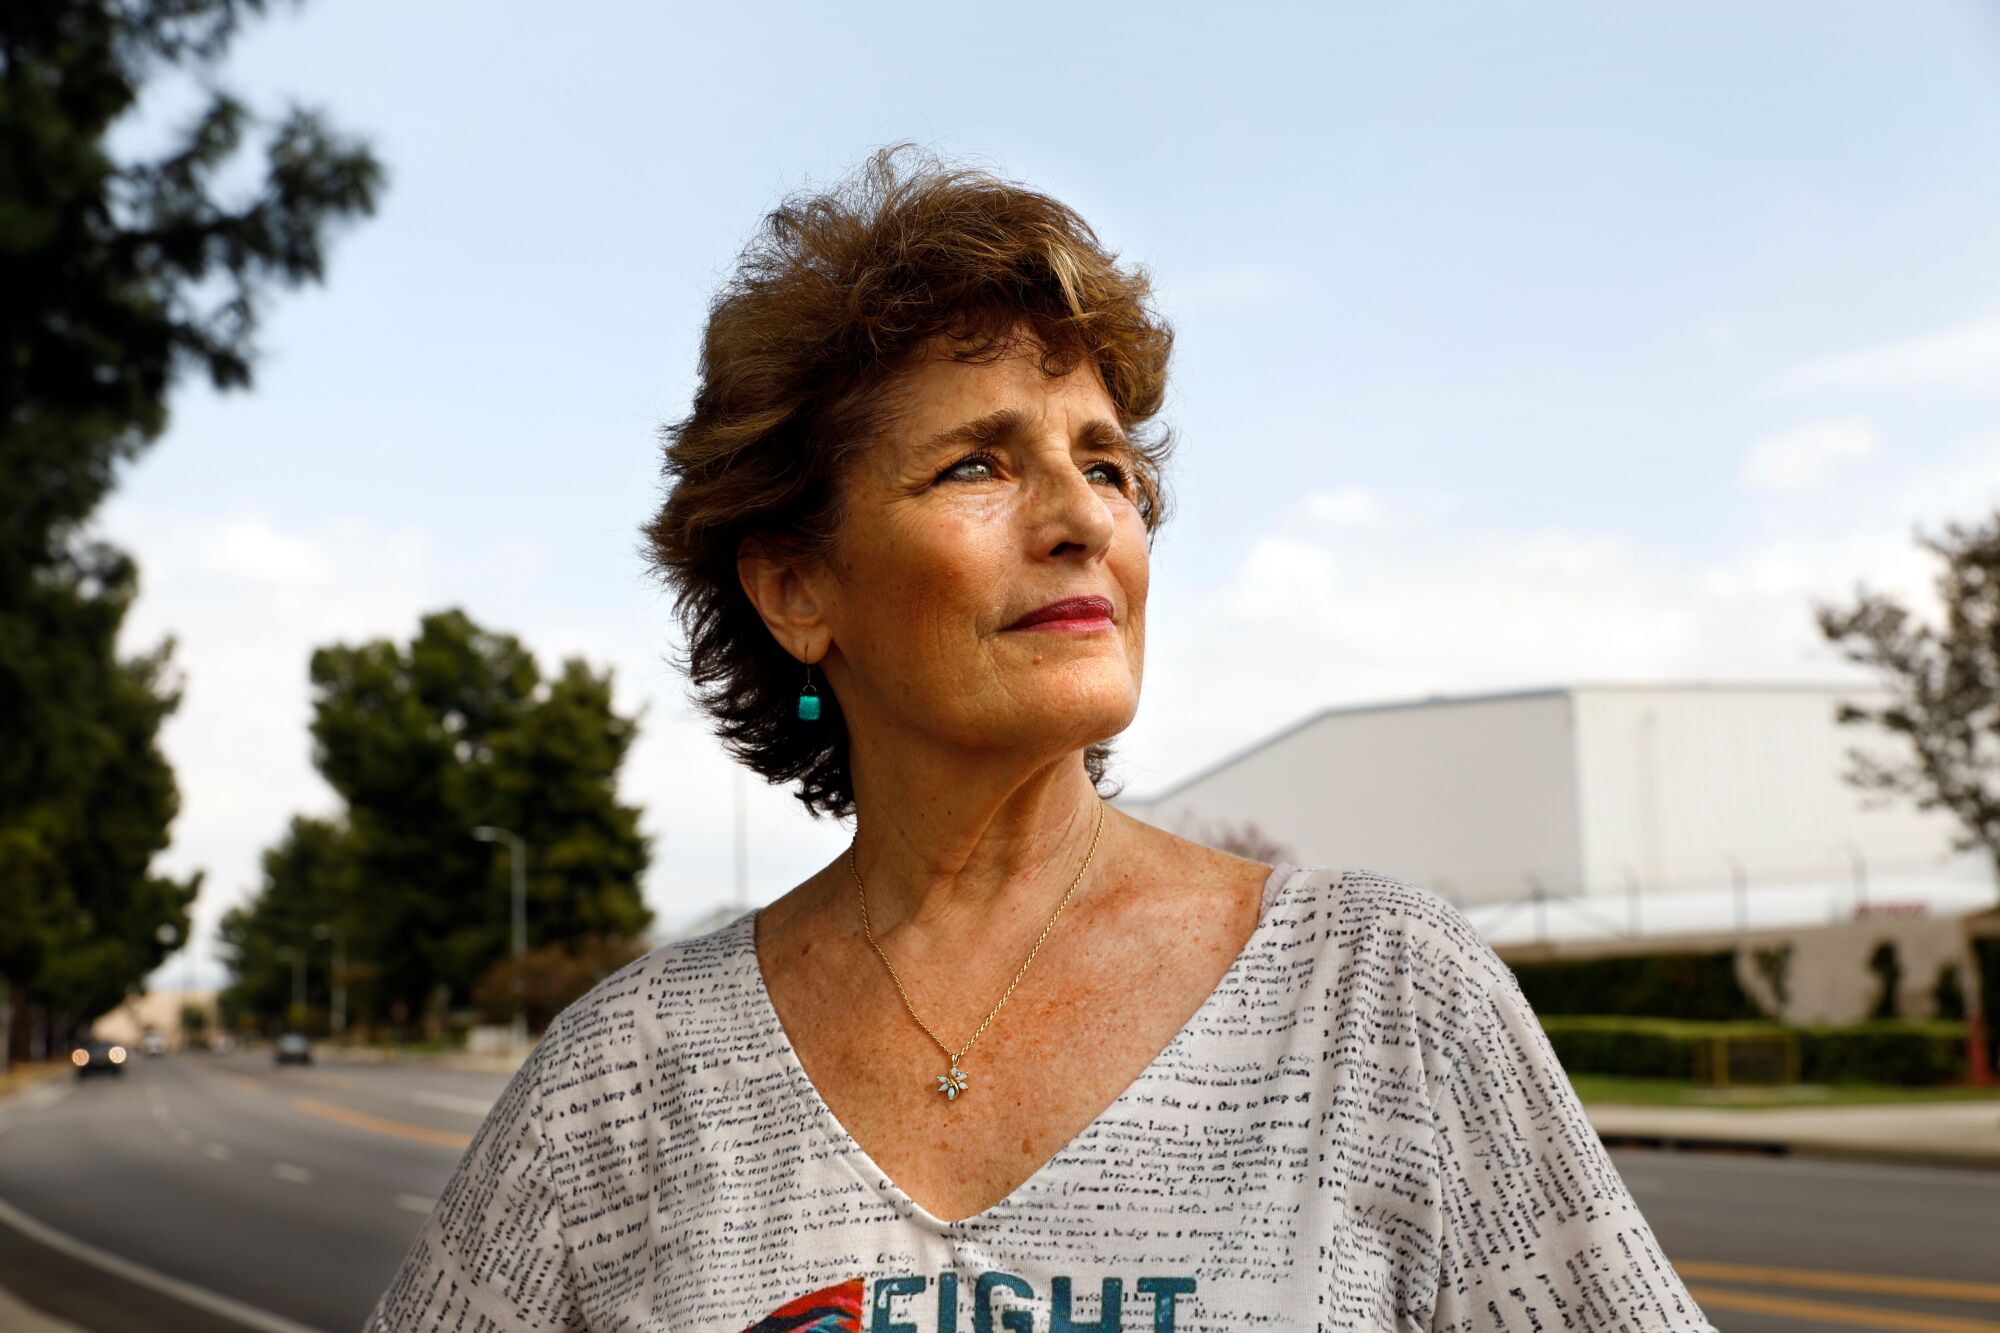 Sue Steinberg stands on a residential street in Lake Balboa; airplane hangars are visible behind her.